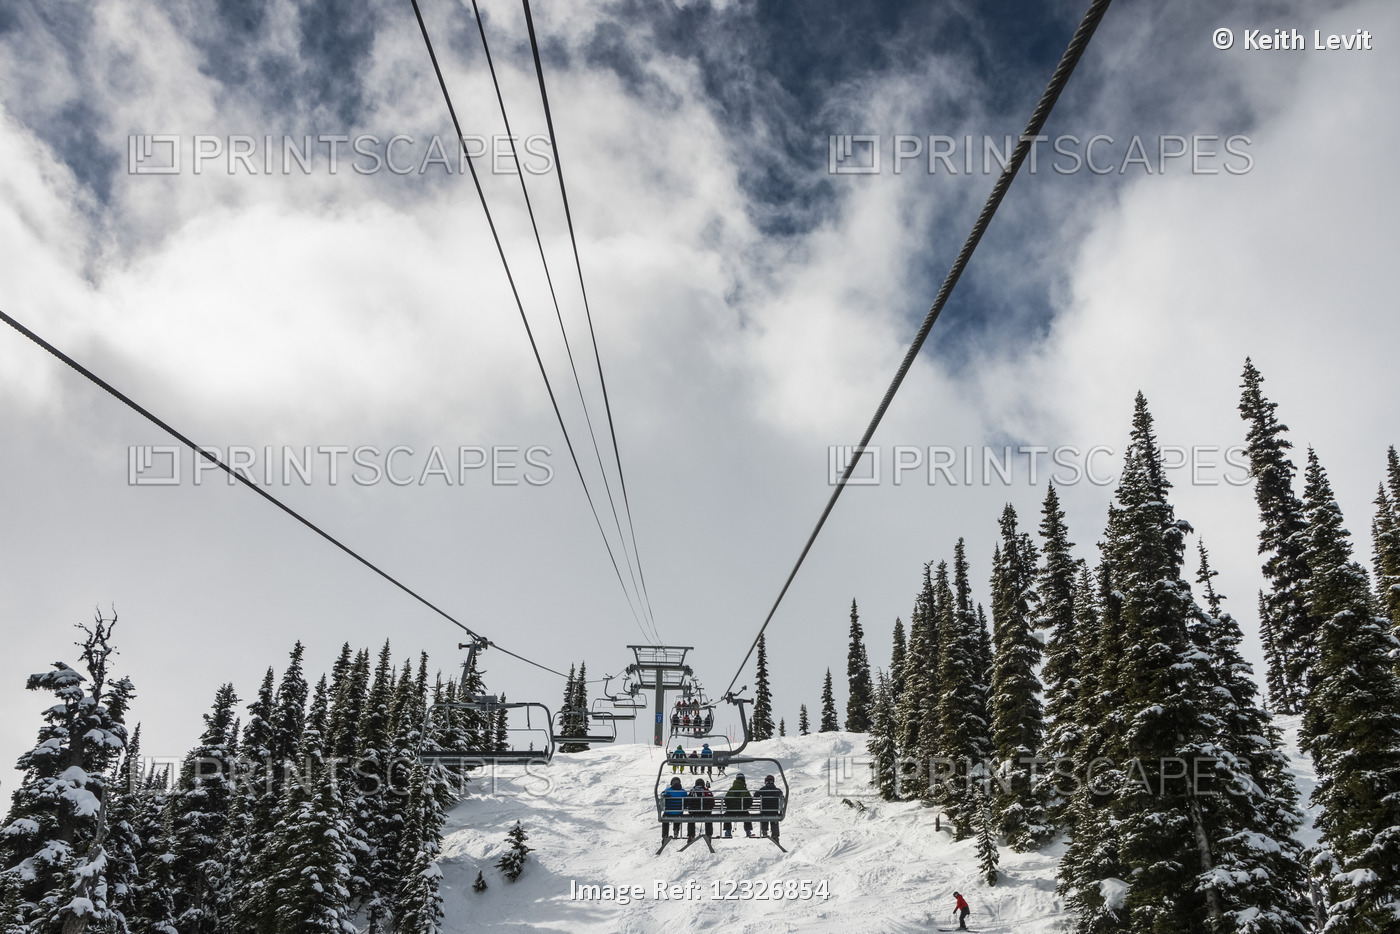 Downhill Skiers Riding A Chairlift At A Ski Resort; Whistler, British Columbia, ...